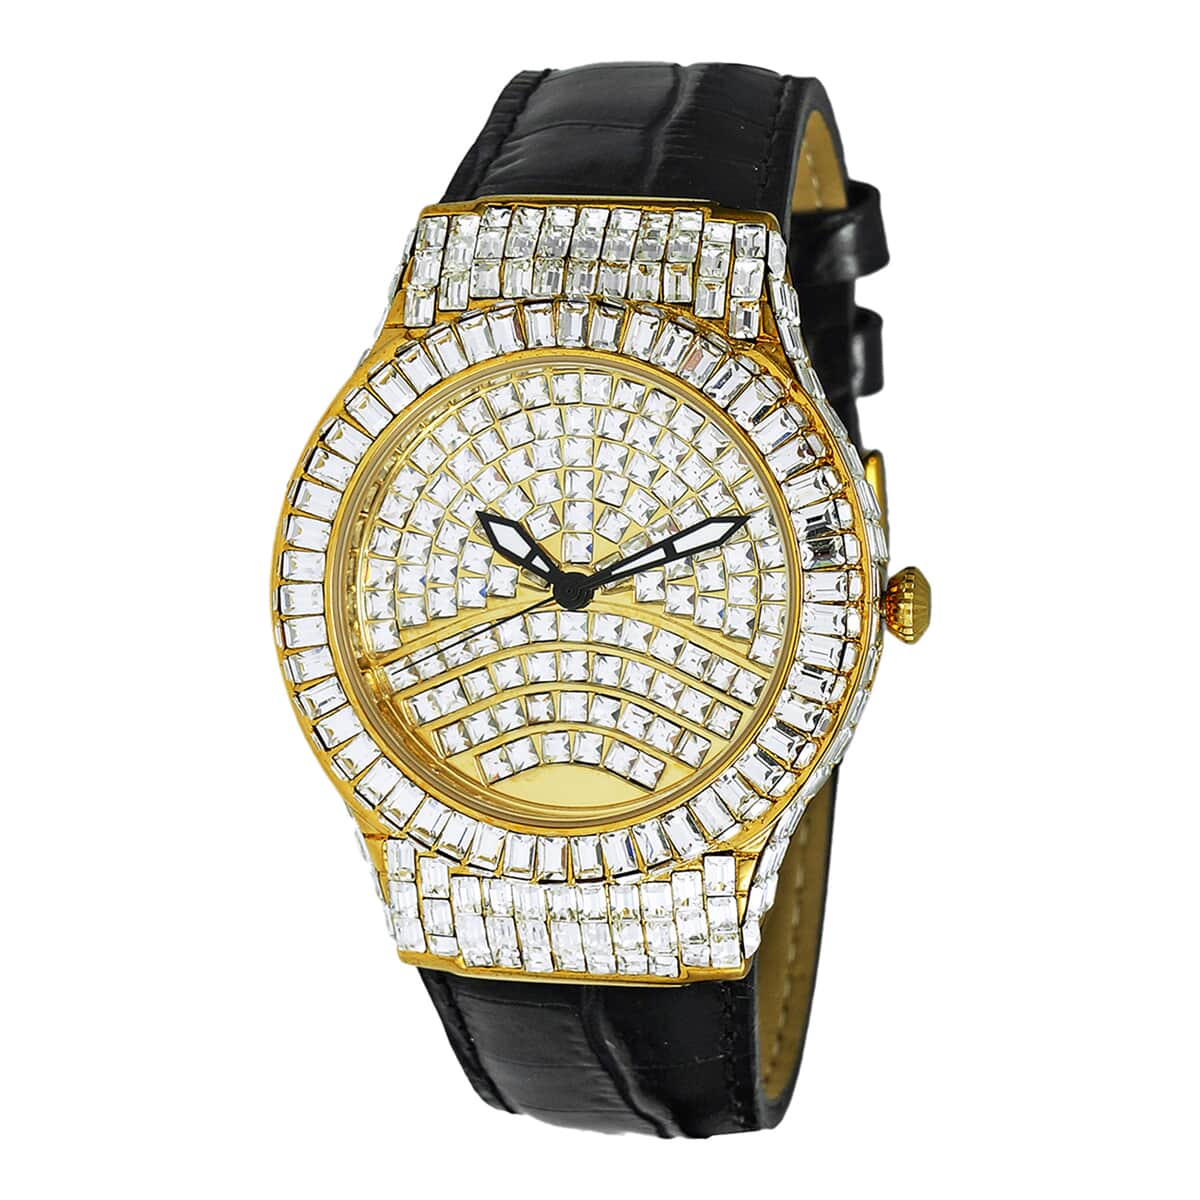 Adee Kaye Austrian Crystal Japan Quartz Movement Goldtone Dial Watch in Black Leather Band (26 mm) | Best Watch for Women | Designer Women's Wrist Watch image number 0